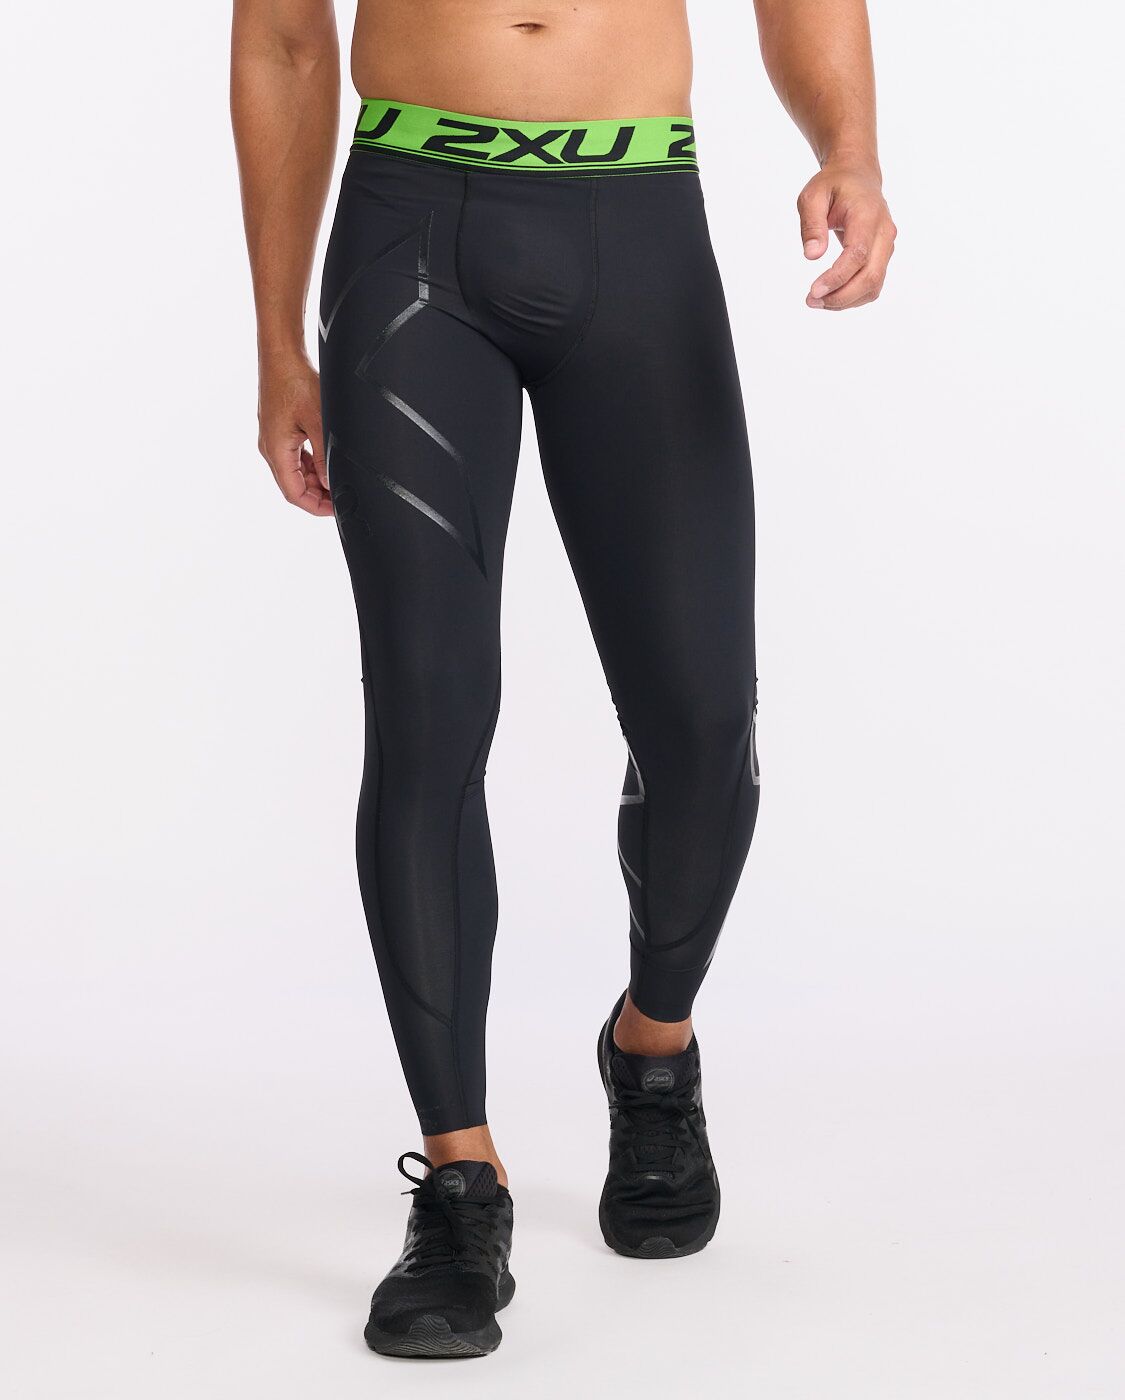 Buy 2XU Men Compression Tights G1 online from GRIT+TONIC in UAE